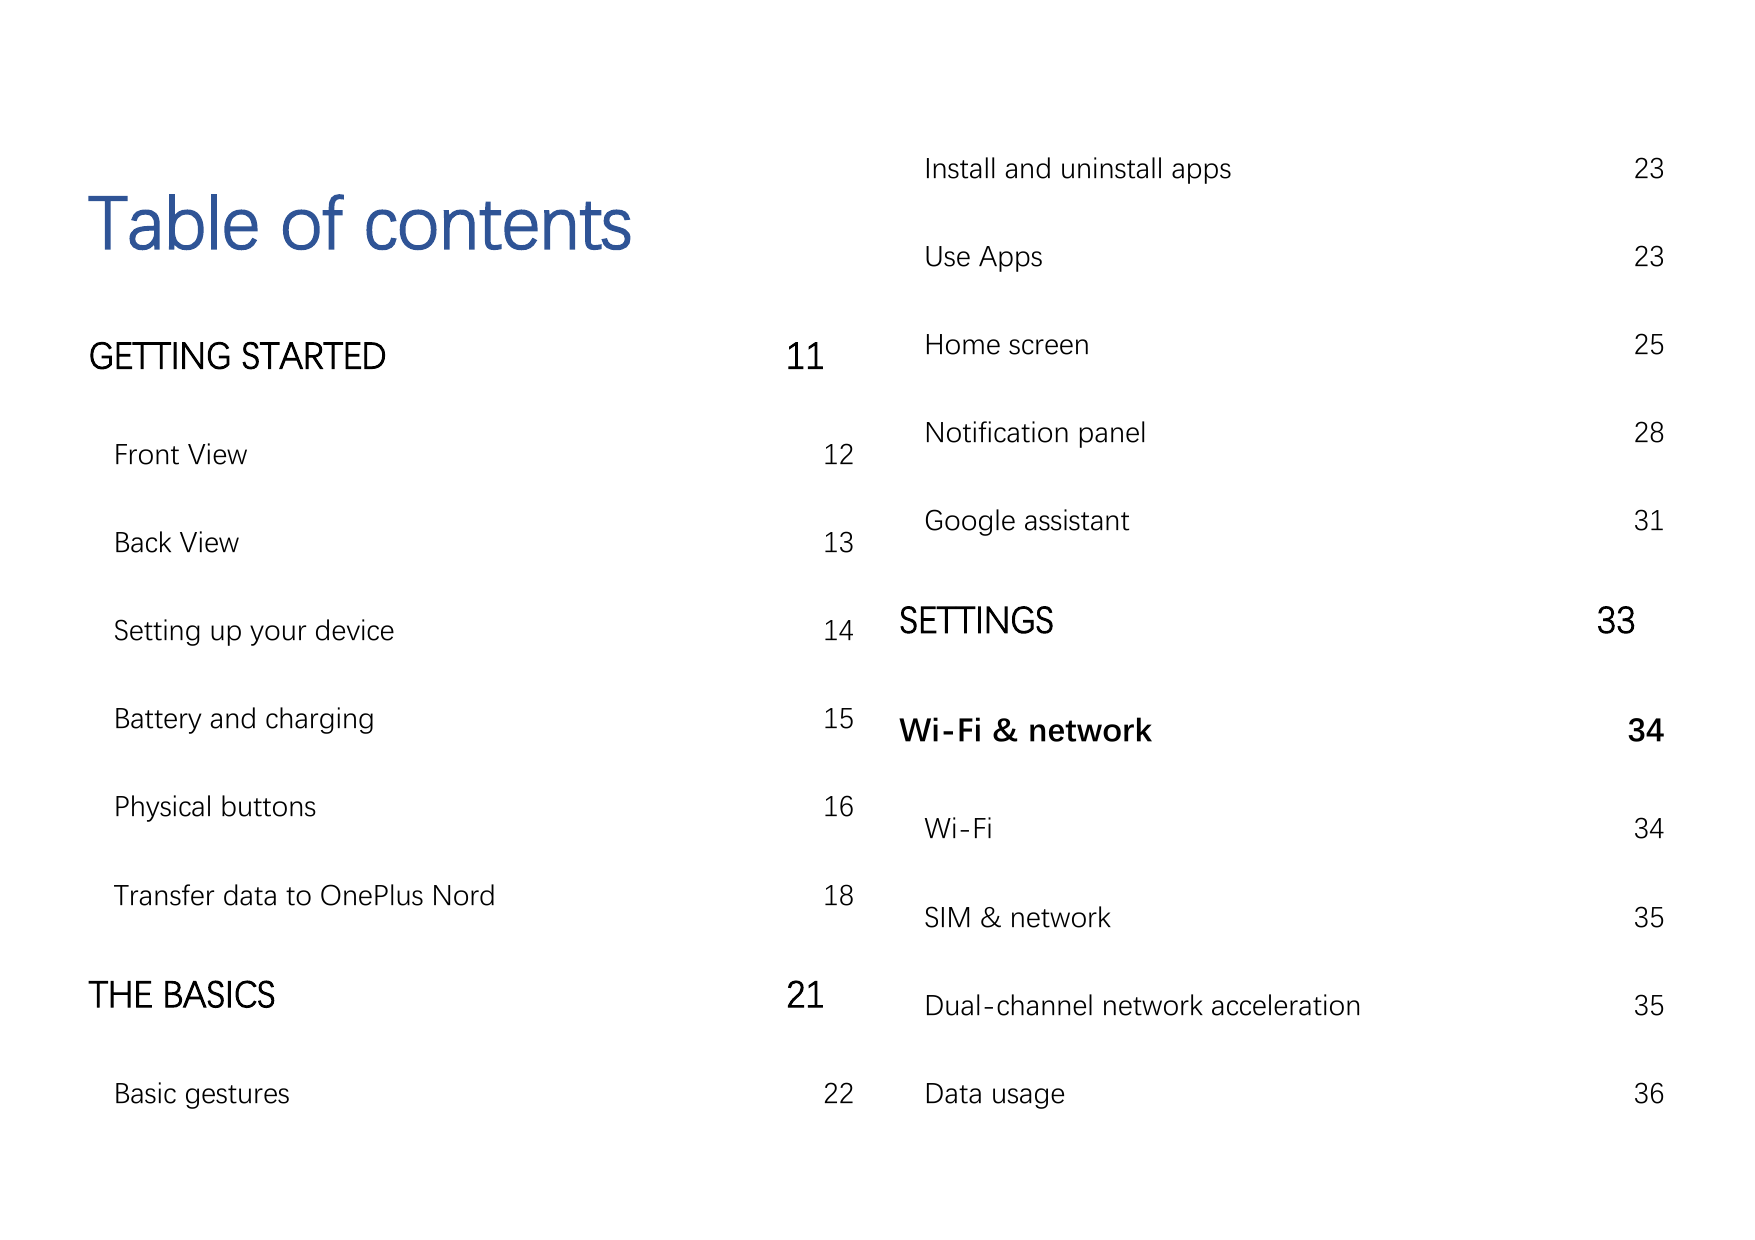 Table of contentsGETTING STARTED11Install and uninstall apps23Use Apps23Home screen25Notification panel28Google assistant31Front